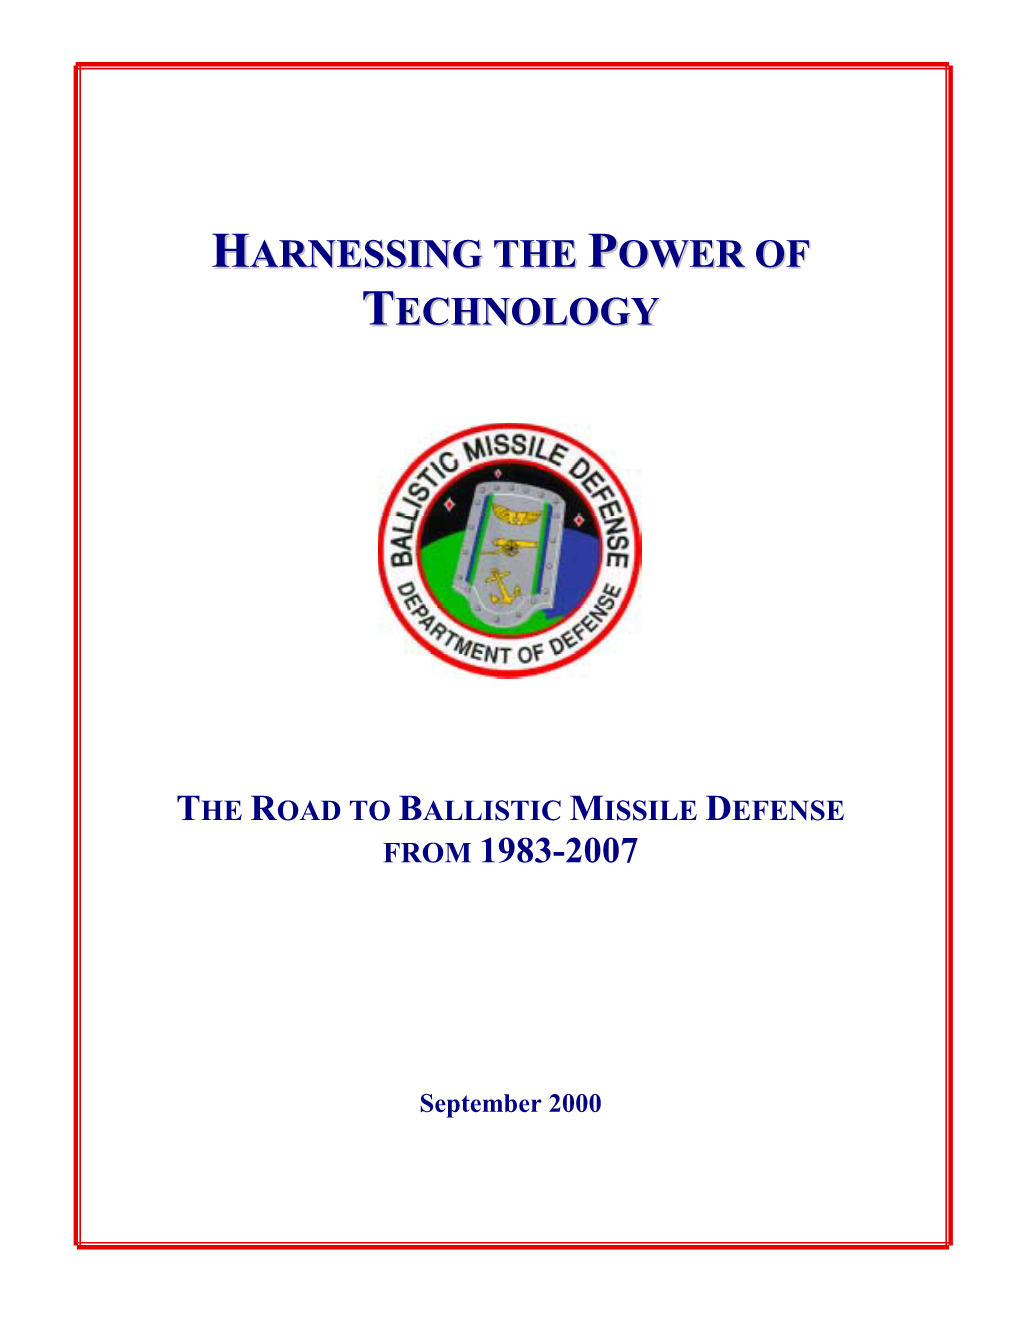 The Road to Ballistic Missile Defense from 1983-2007